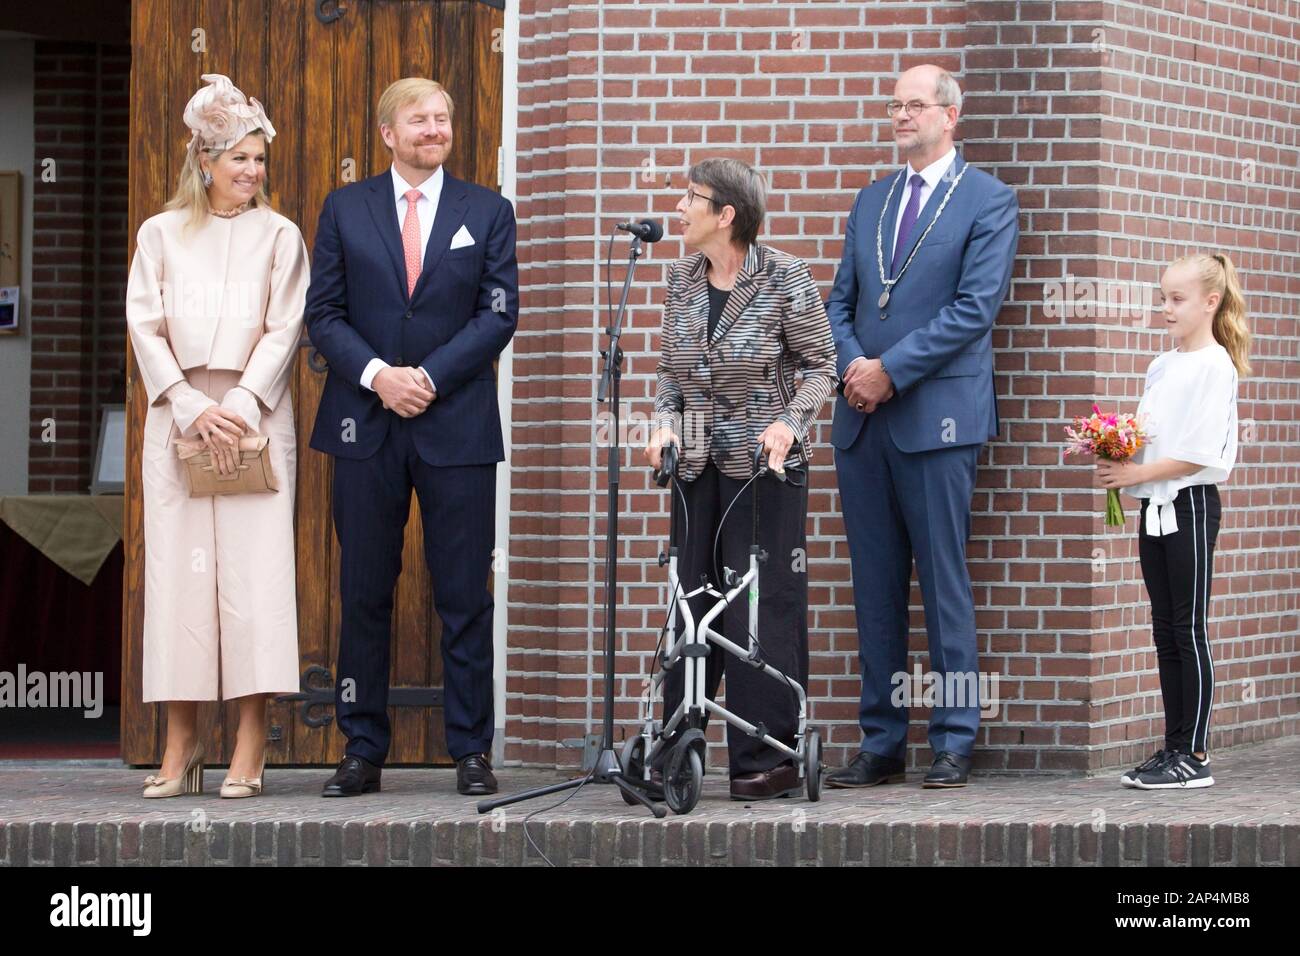 Hoogeveen, the Netherlands - September 18, 2019: royal couple Maxima and Willem-Alexander greeted by the mayor of Hoogeveen and the King's Commissione Stock Photo